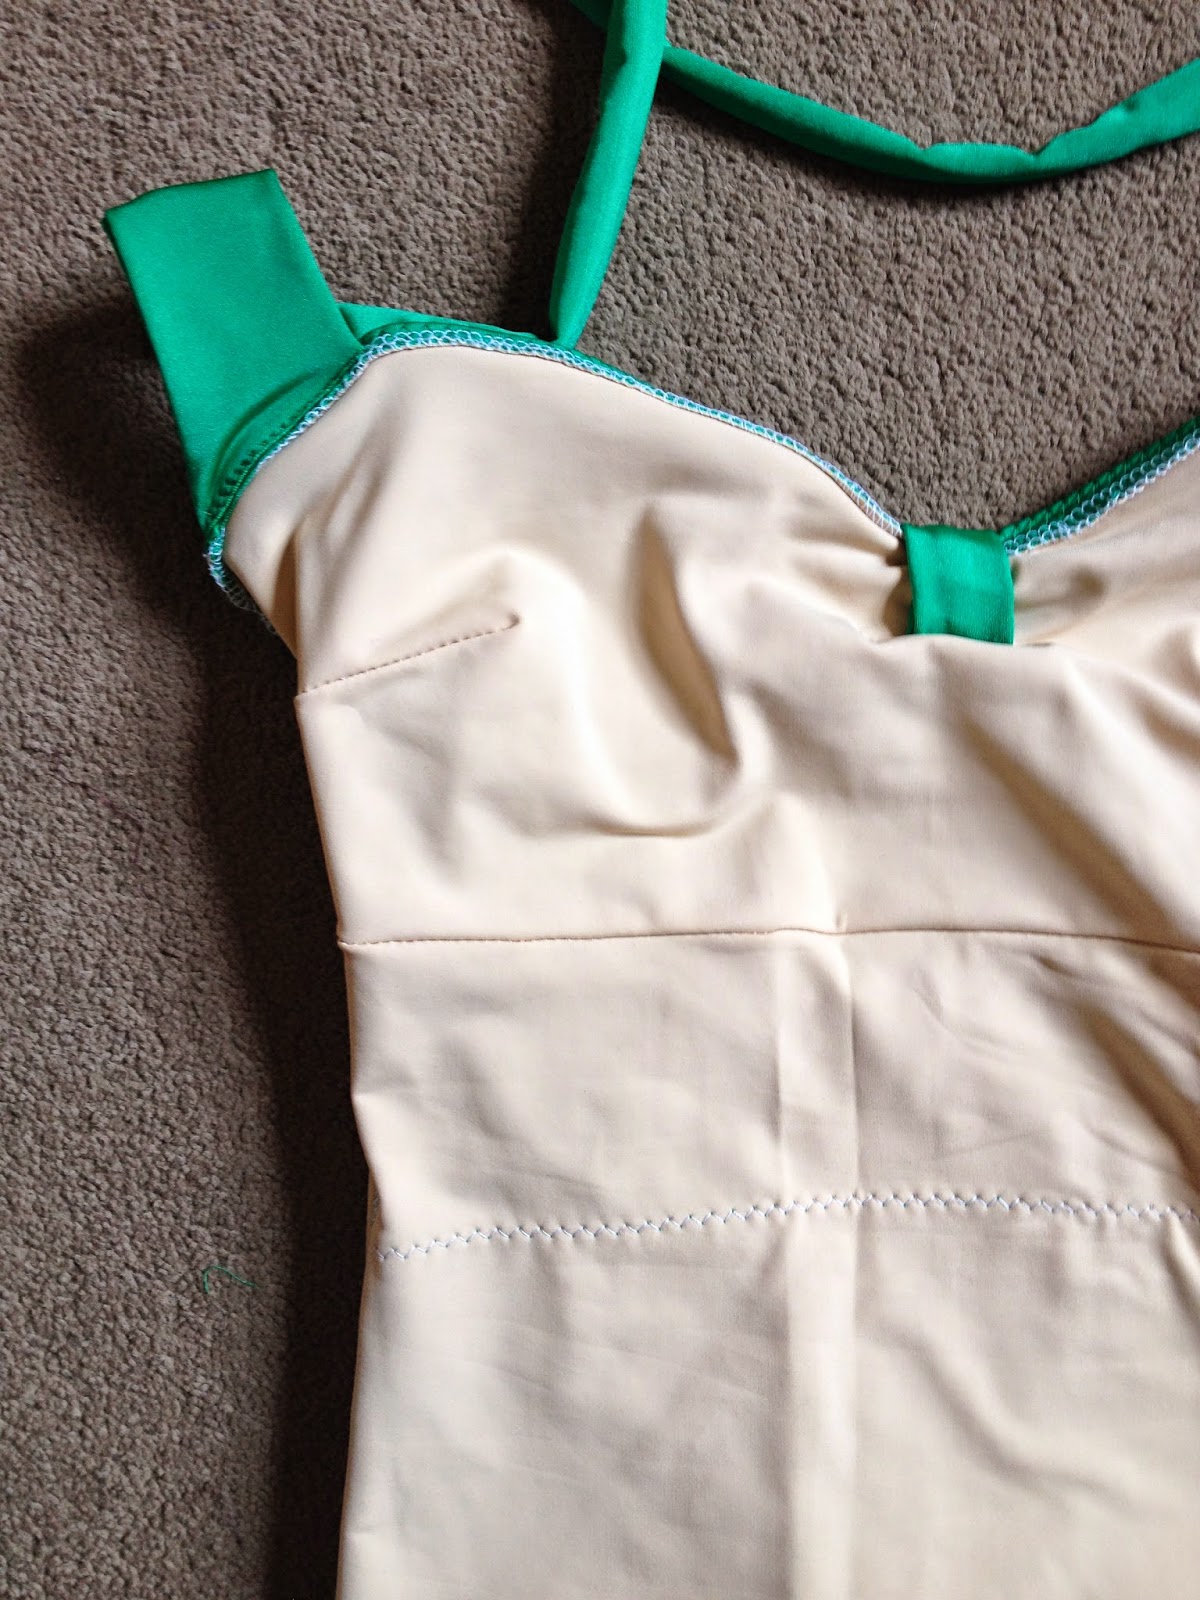 Diary of a Chainstitcher: Emerald Green Bombshell Swimsuit 